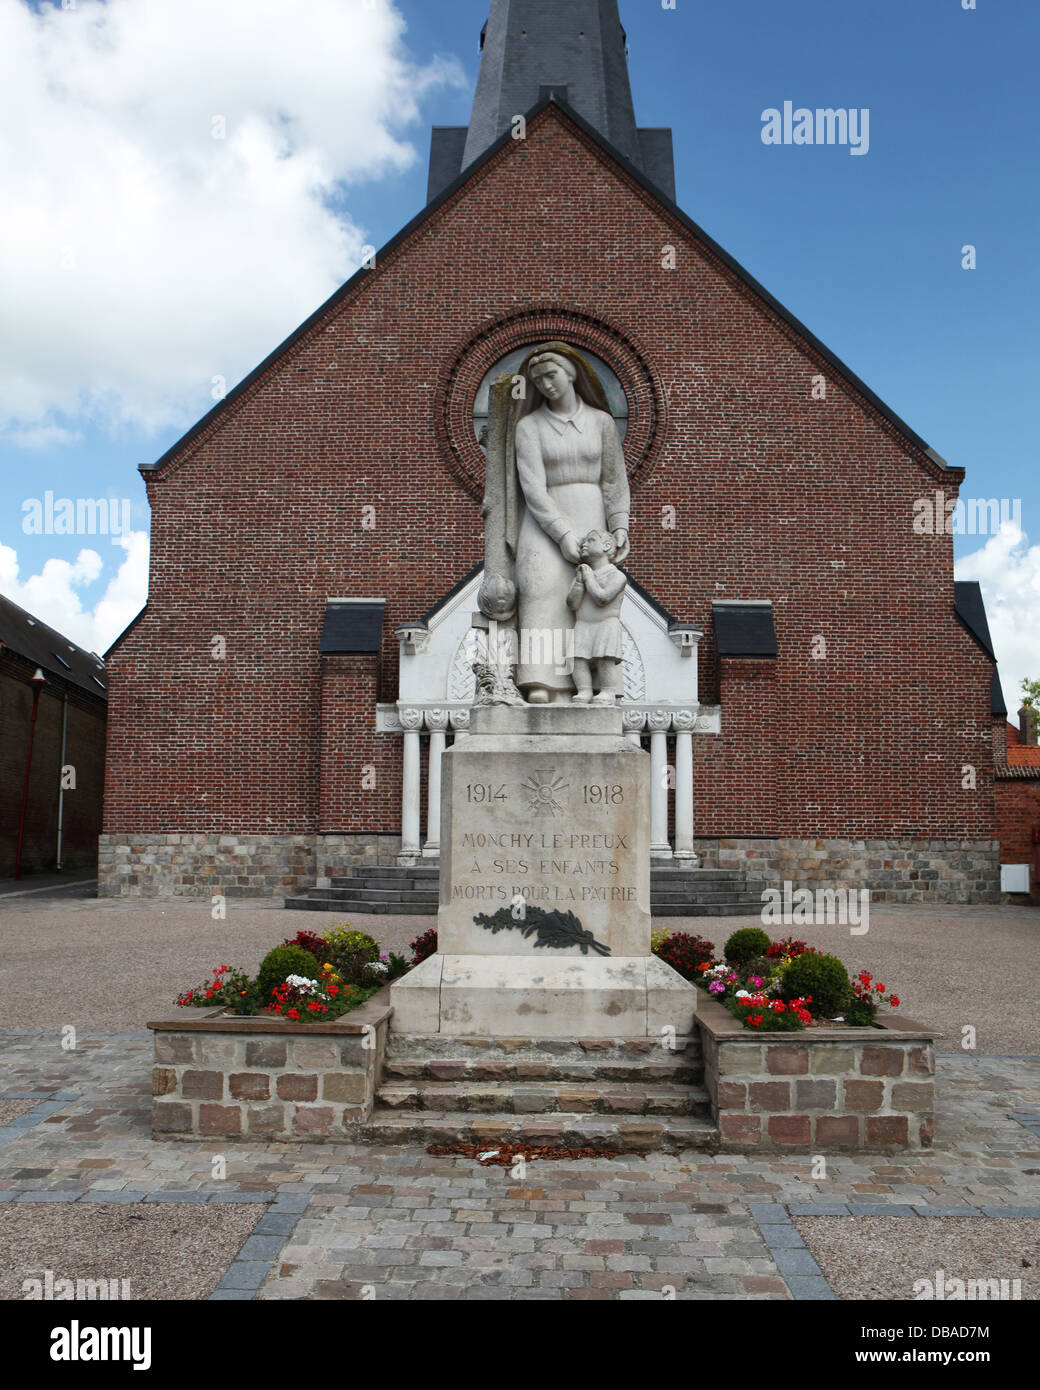 French Great War memorial at Monchy-le-Preux, France Stock Photo